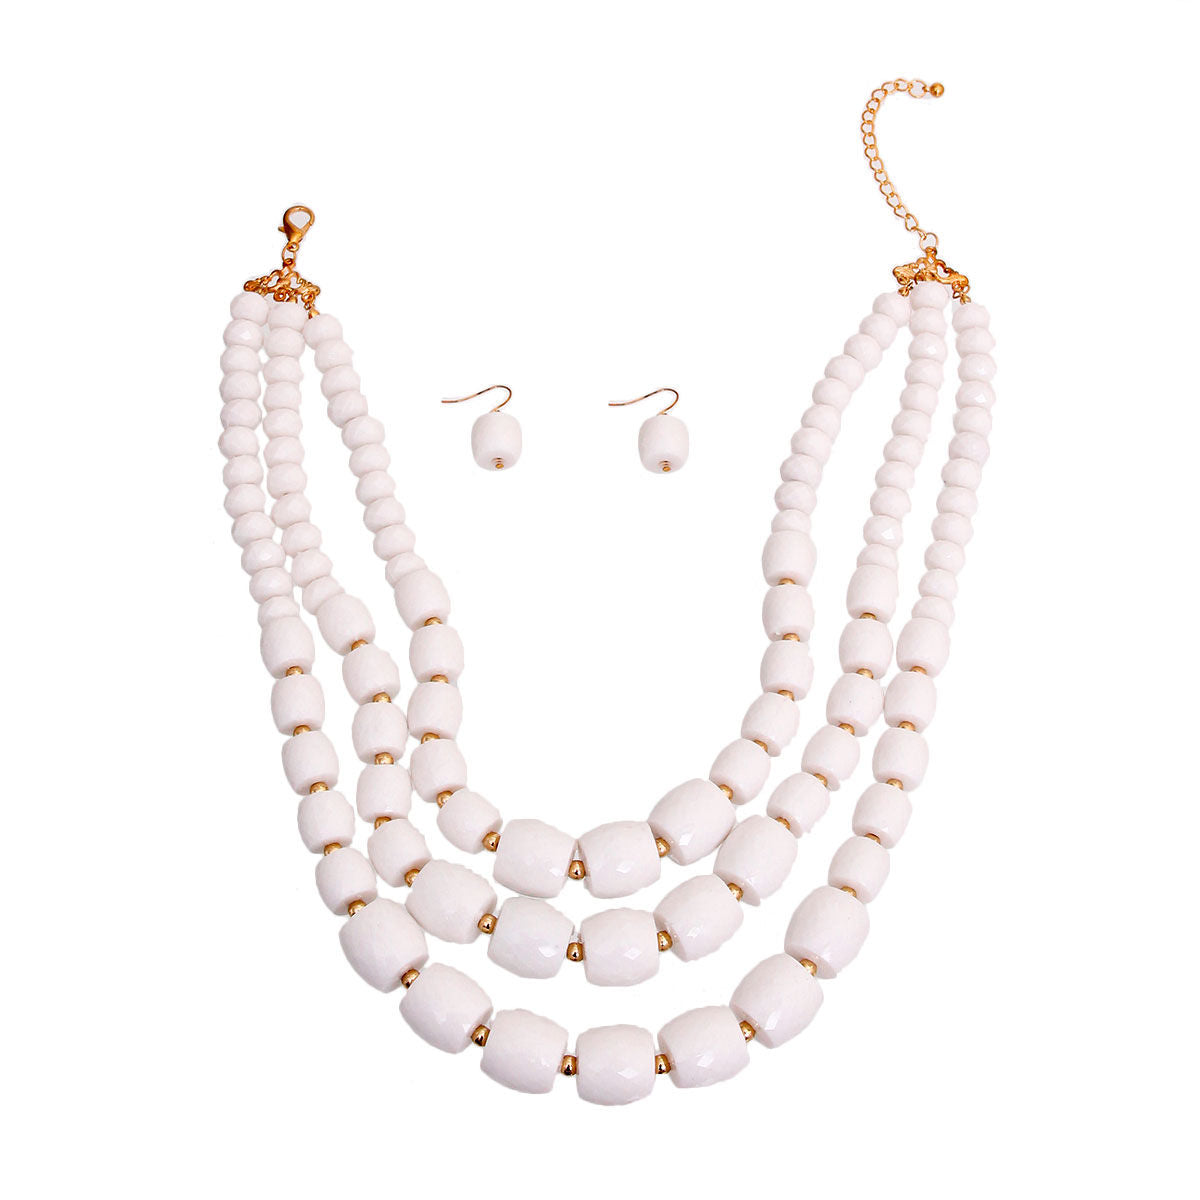 White Cylinder Bead Necklace